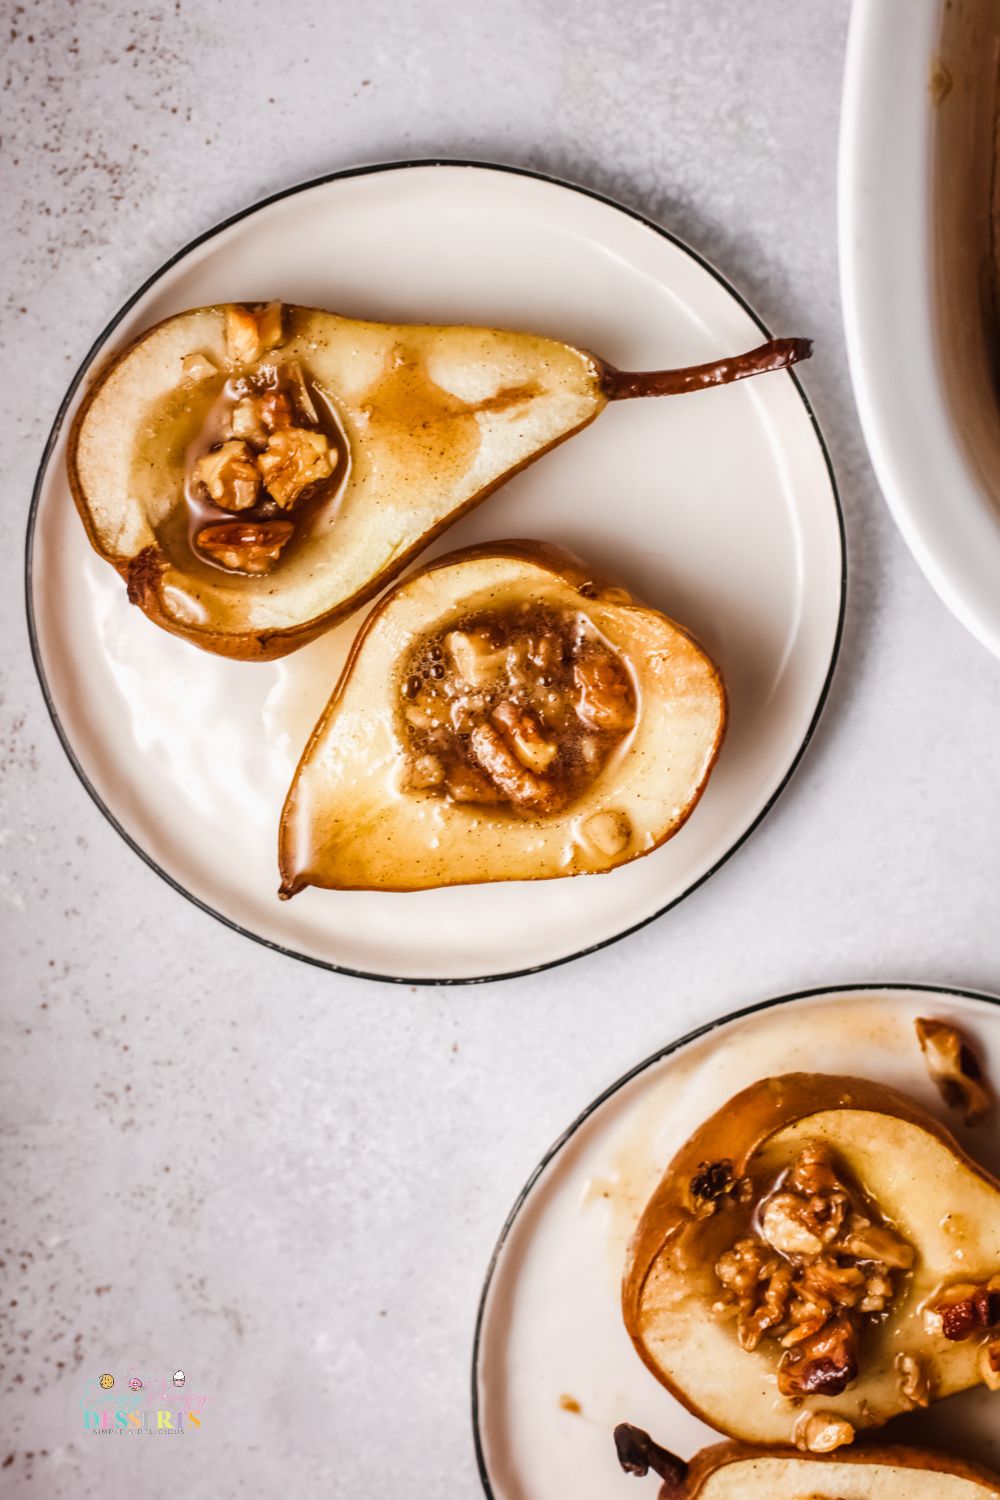 Baked pears with honey in a dessert plate